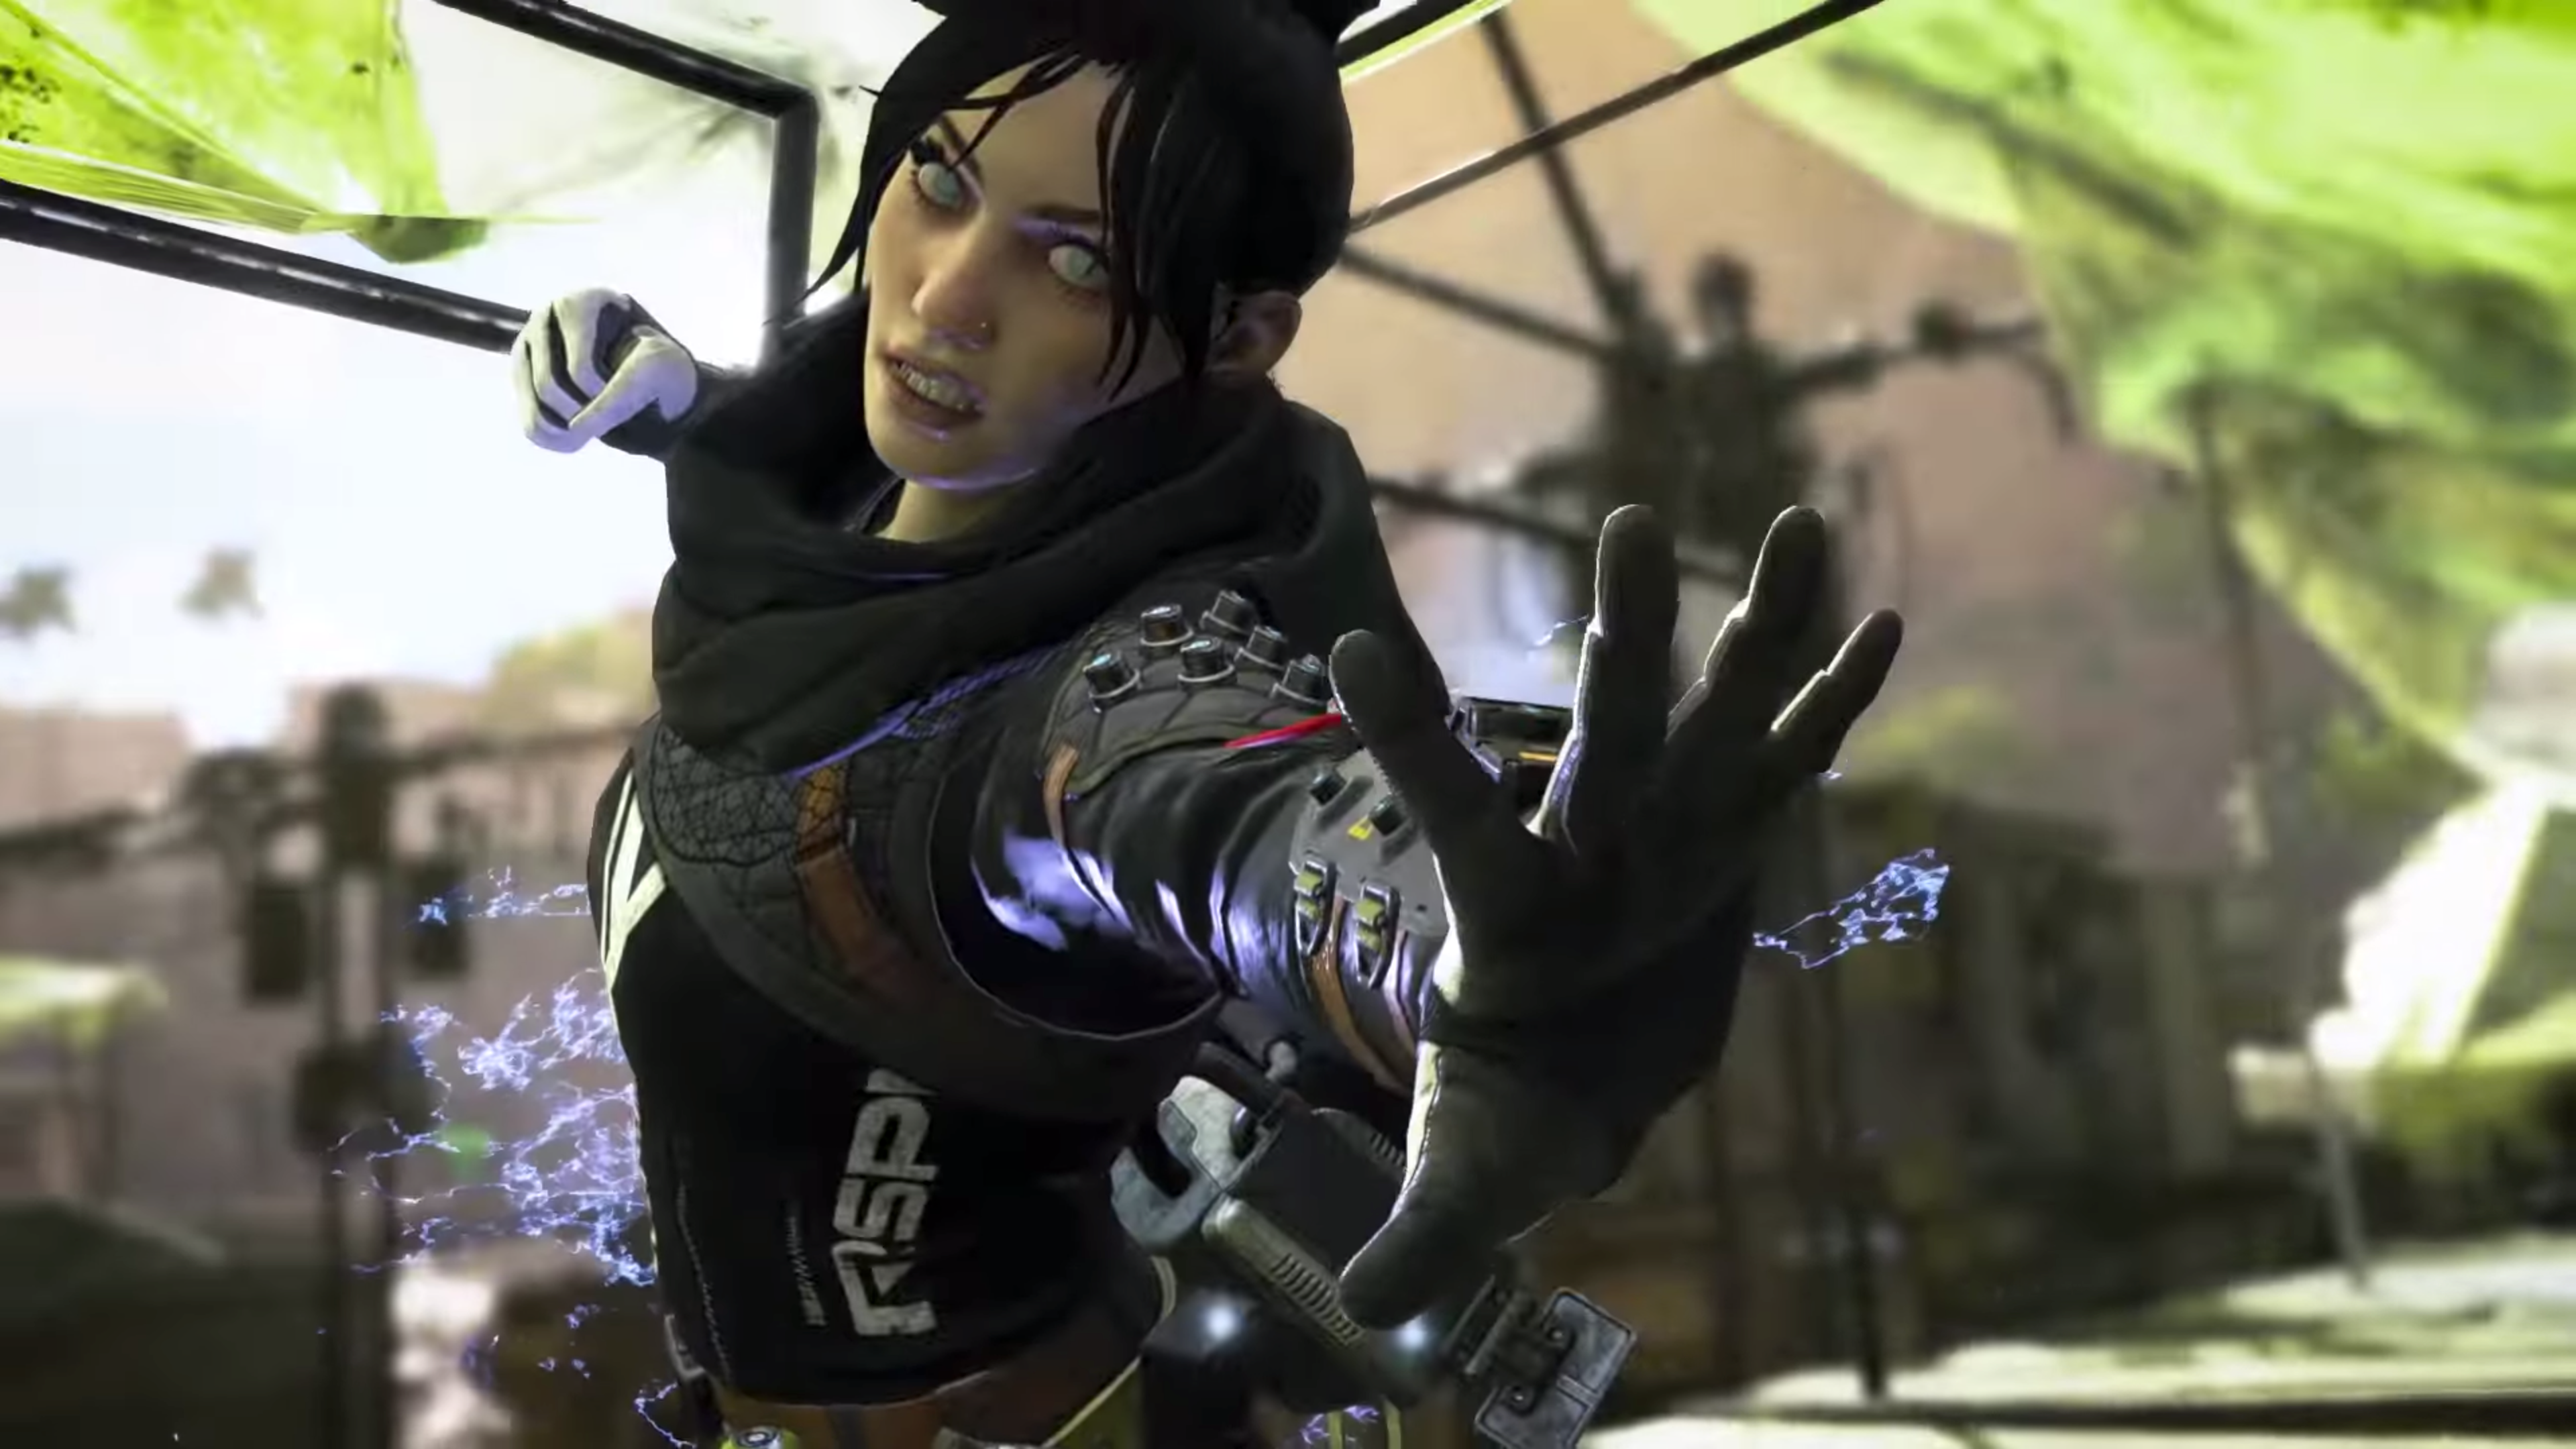 Wraith And Bloodhound’s Backstories Are Apex Legends’ Best Mystery